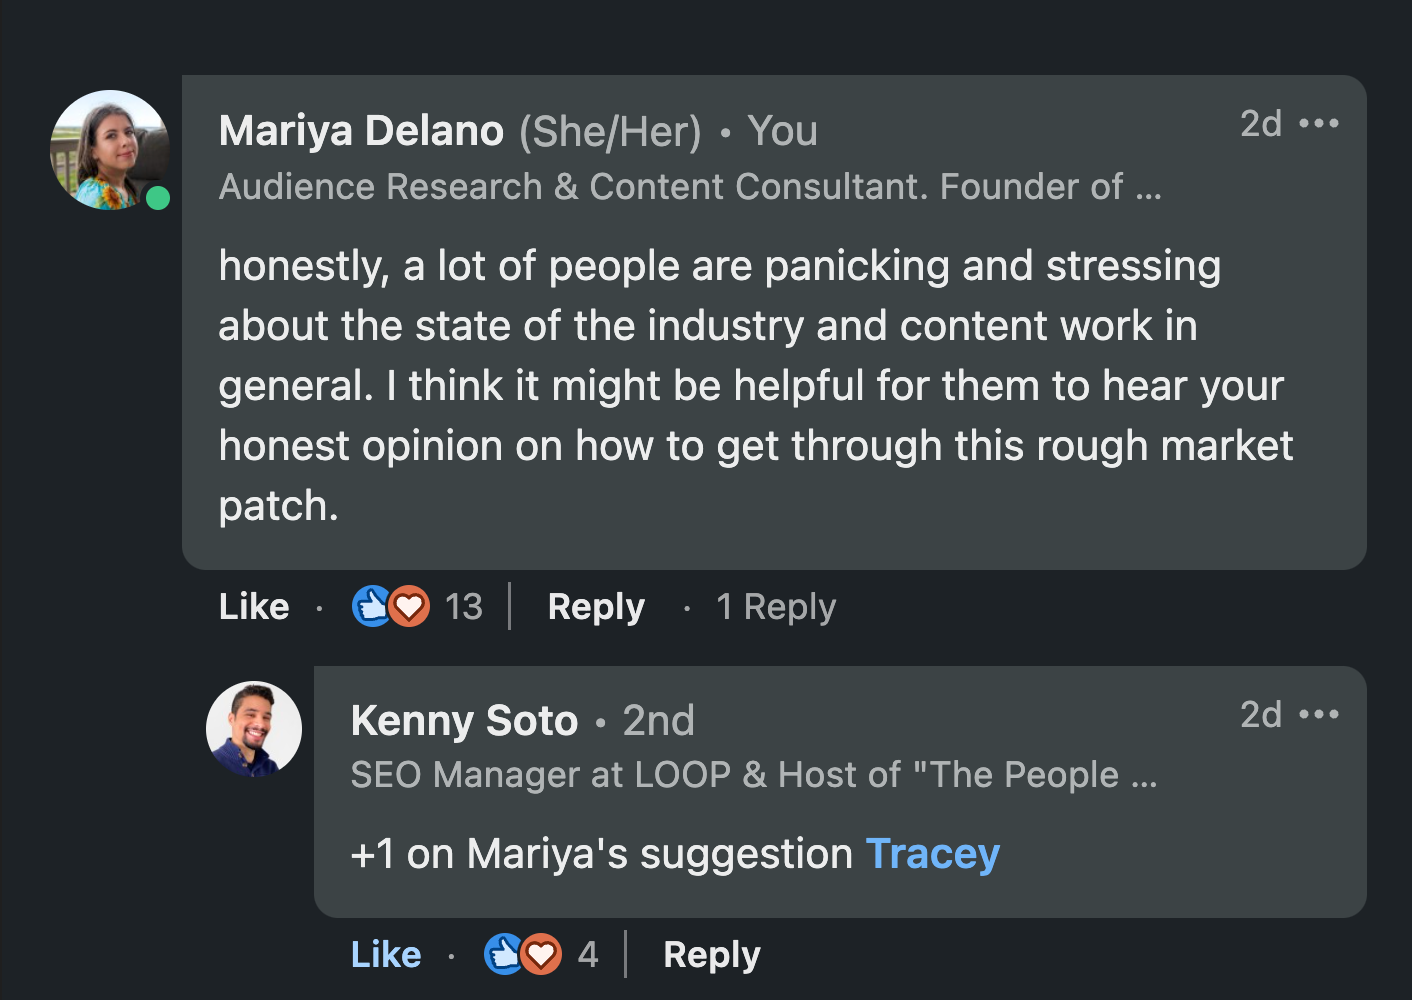 A screenshot of my comment that says: "honestly, a lot of people are panicking and stressing about the state of the industry and content work in general. I think it might be helpful for them to hear your honest opinion on how to get through this rough market patch."